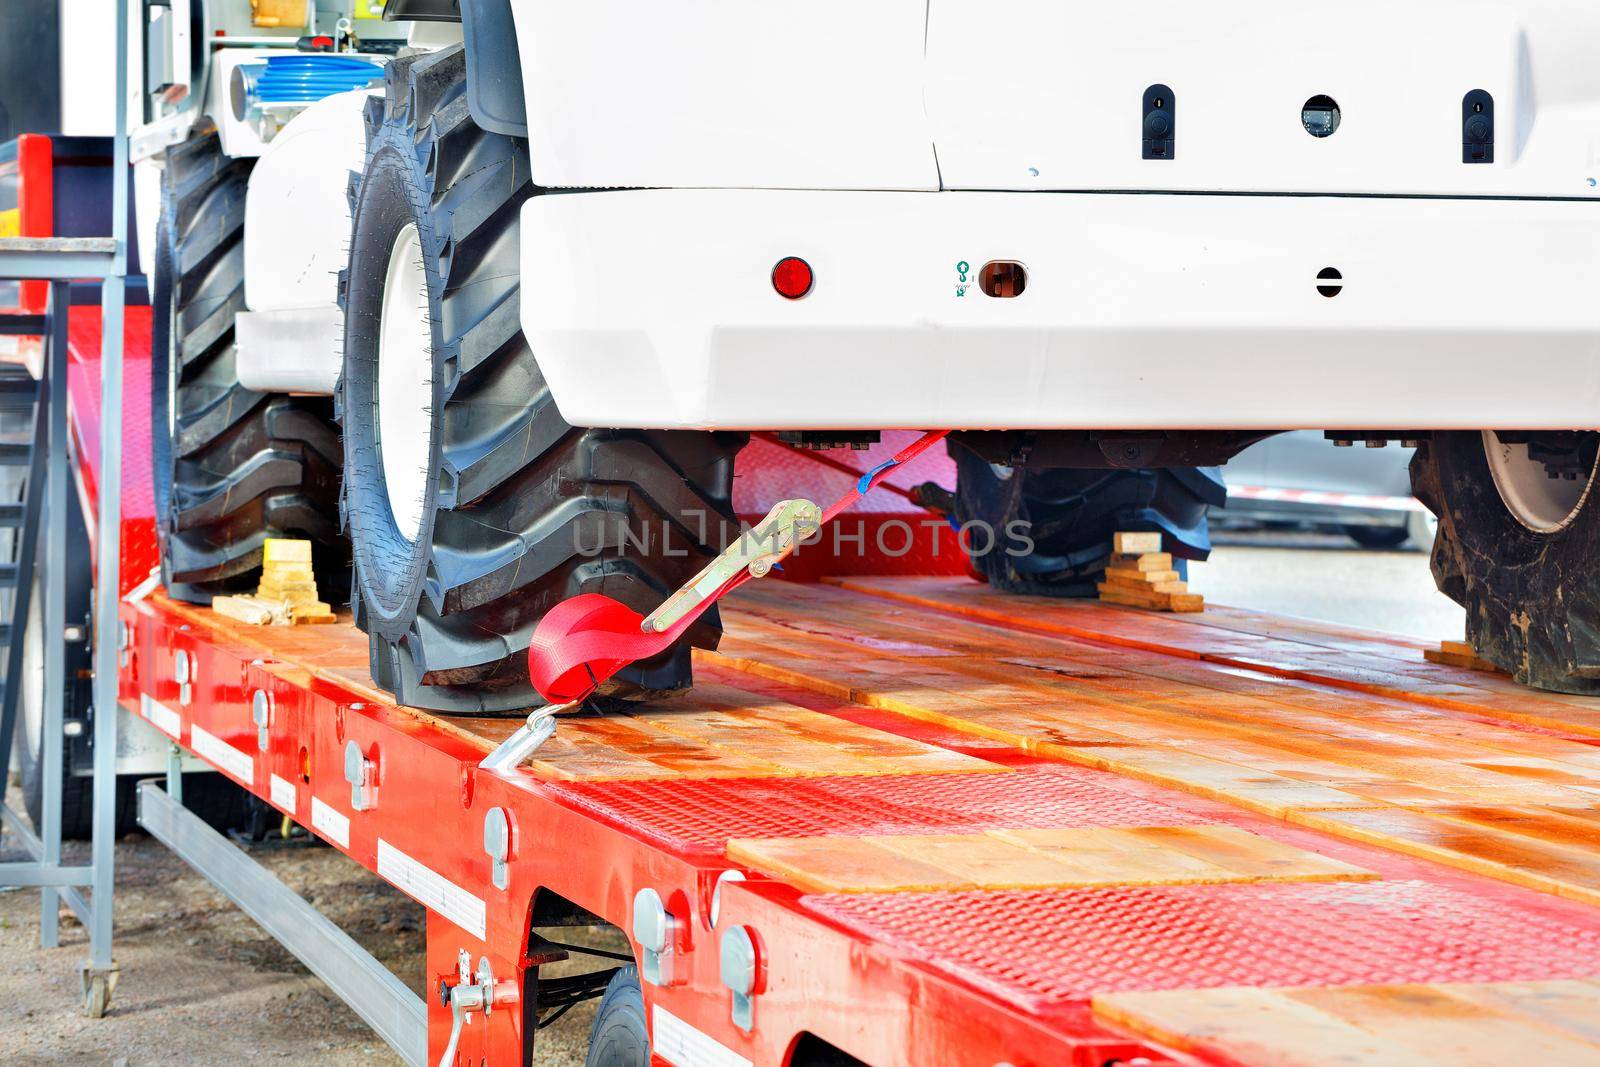 Securing heavy loads with a lashing strap on the transport platform, copy space.